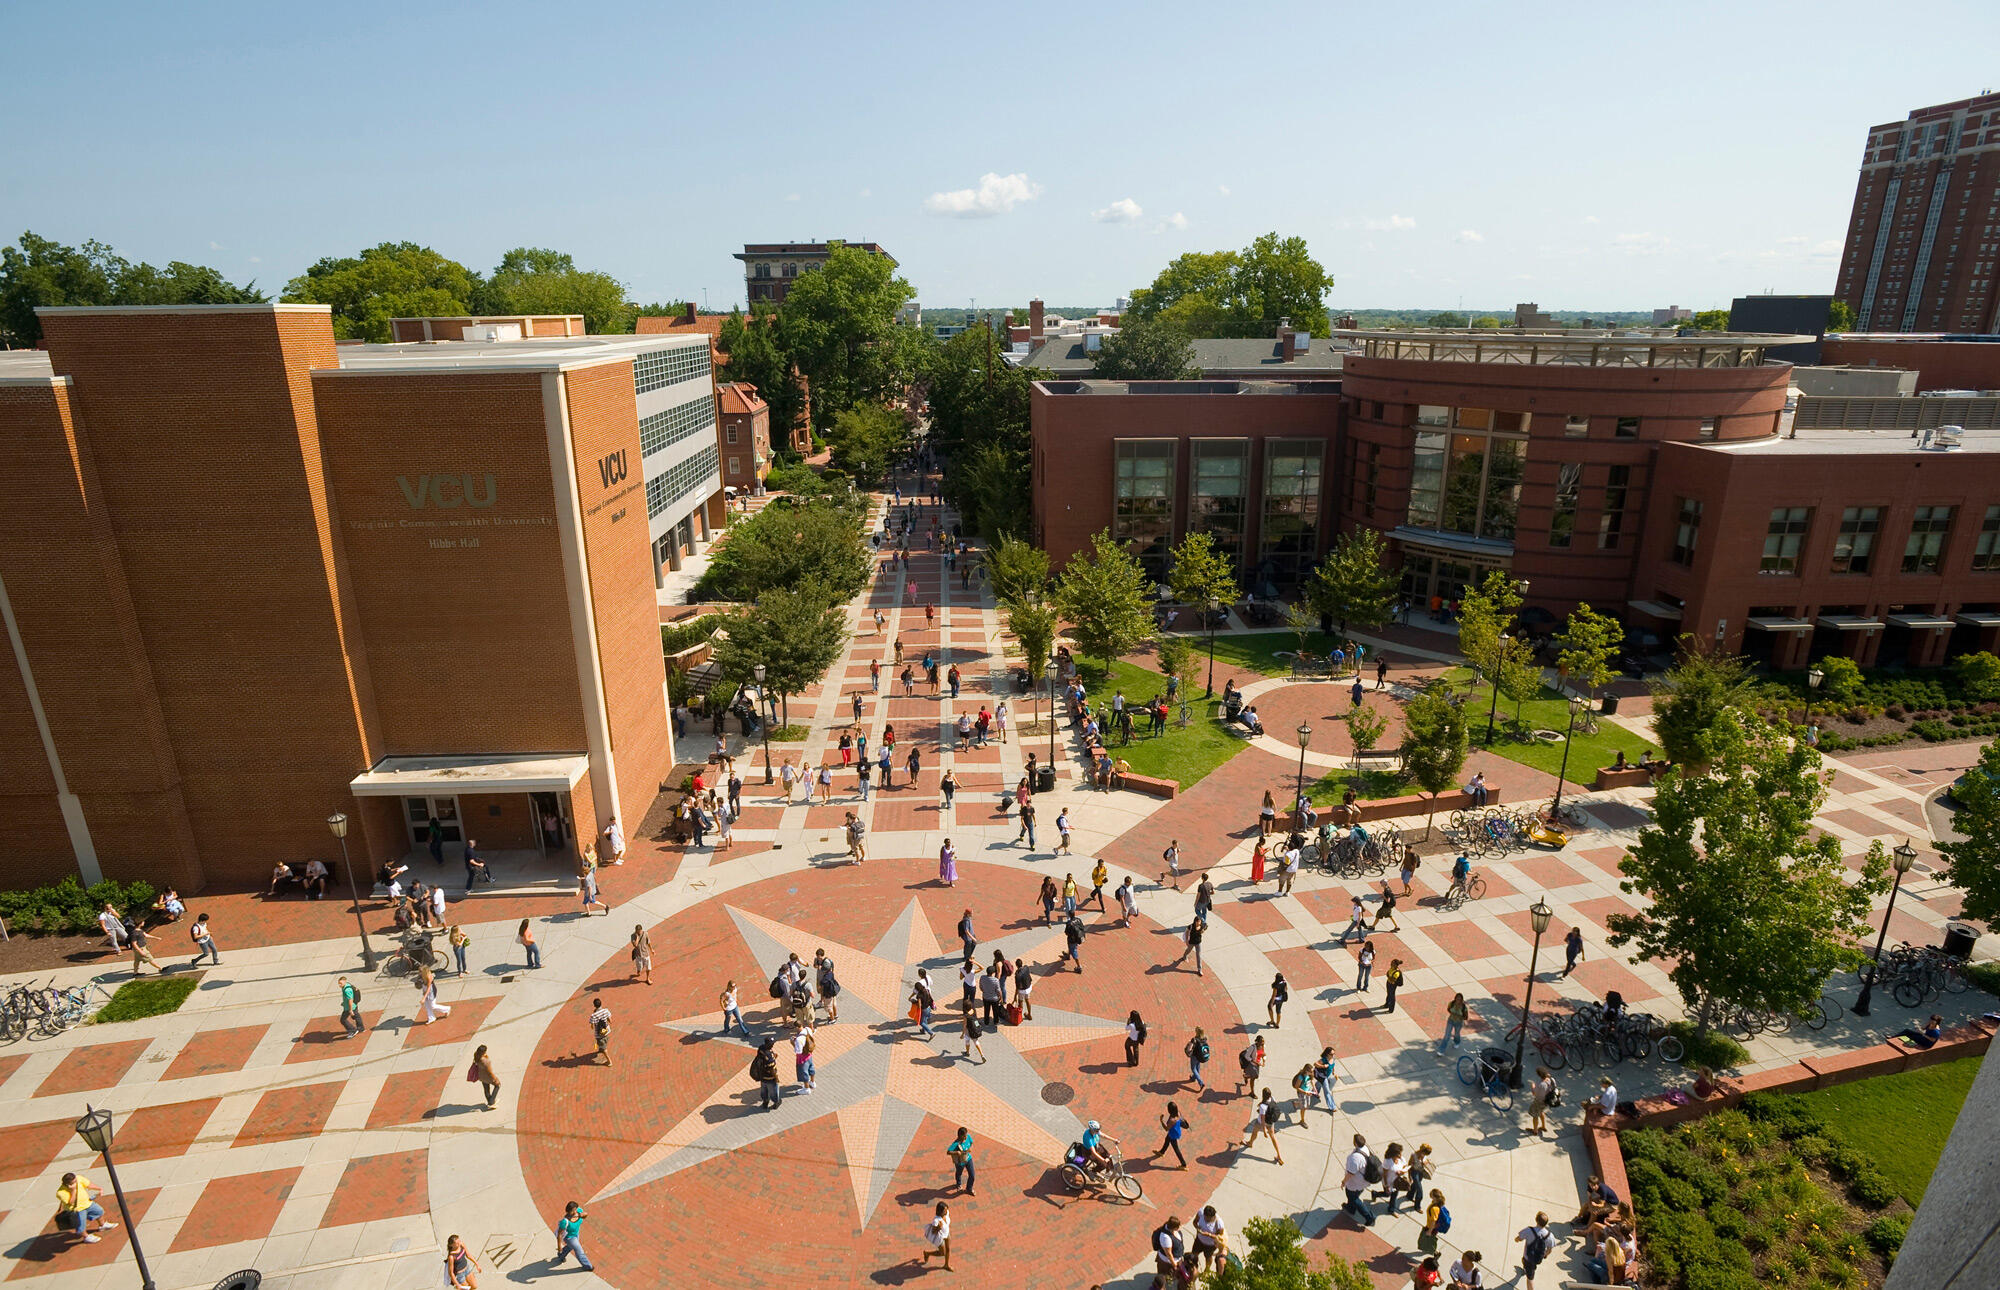 Image from above of VCU's Compass area.